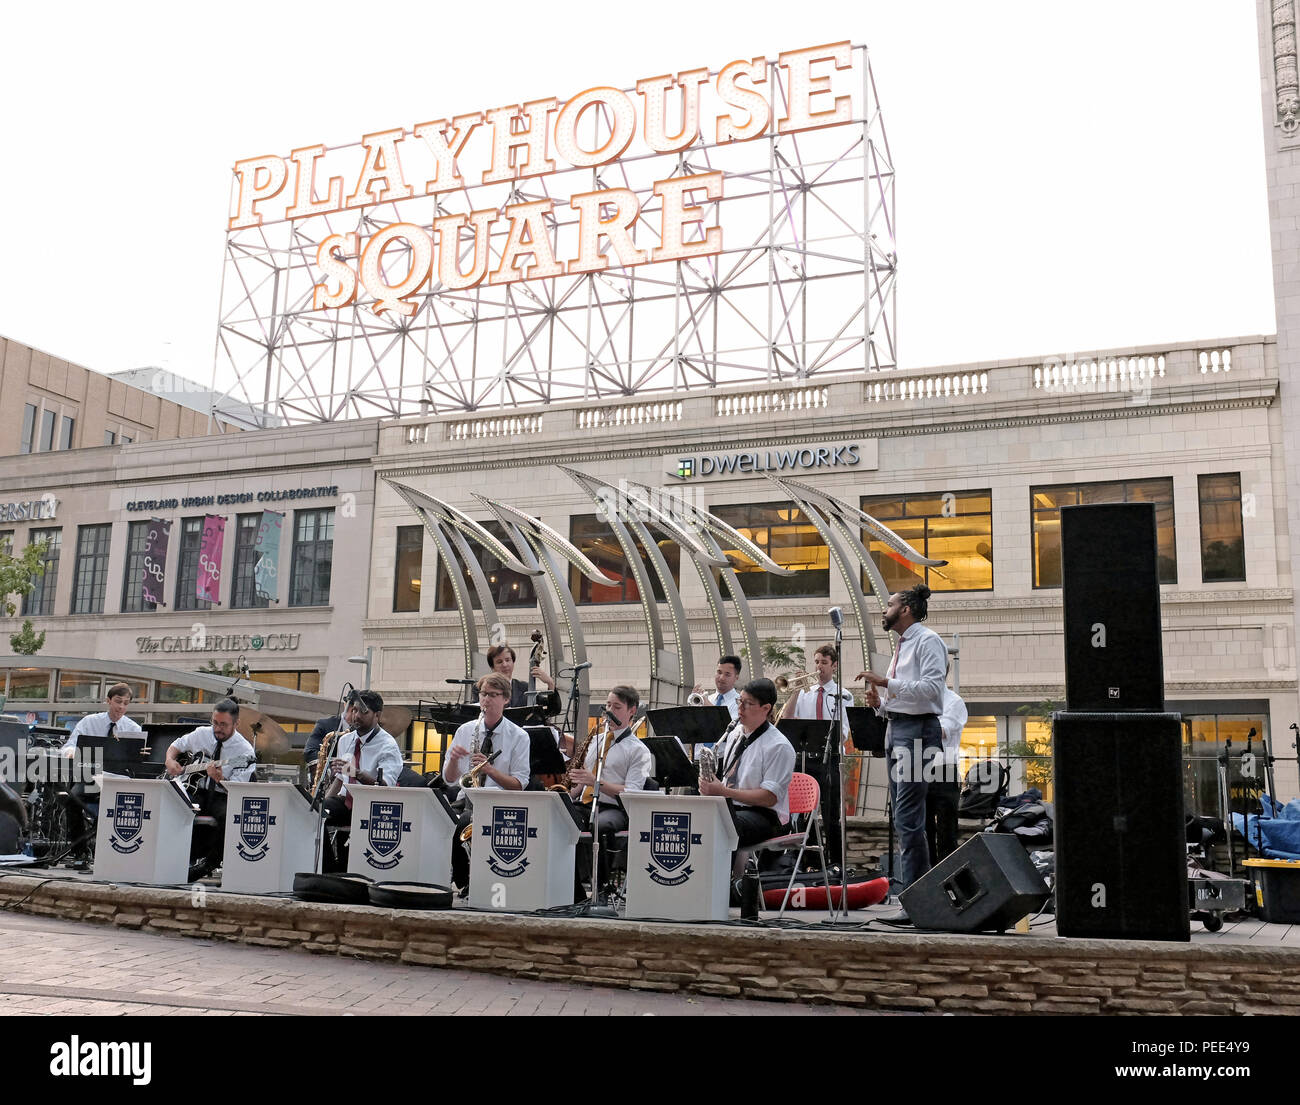 The L.A. Swing Barons play live outdoors in Cleveland's Playhouse Square during one of the cities weekly outdoor concert and dance gatherings. Stock Photo